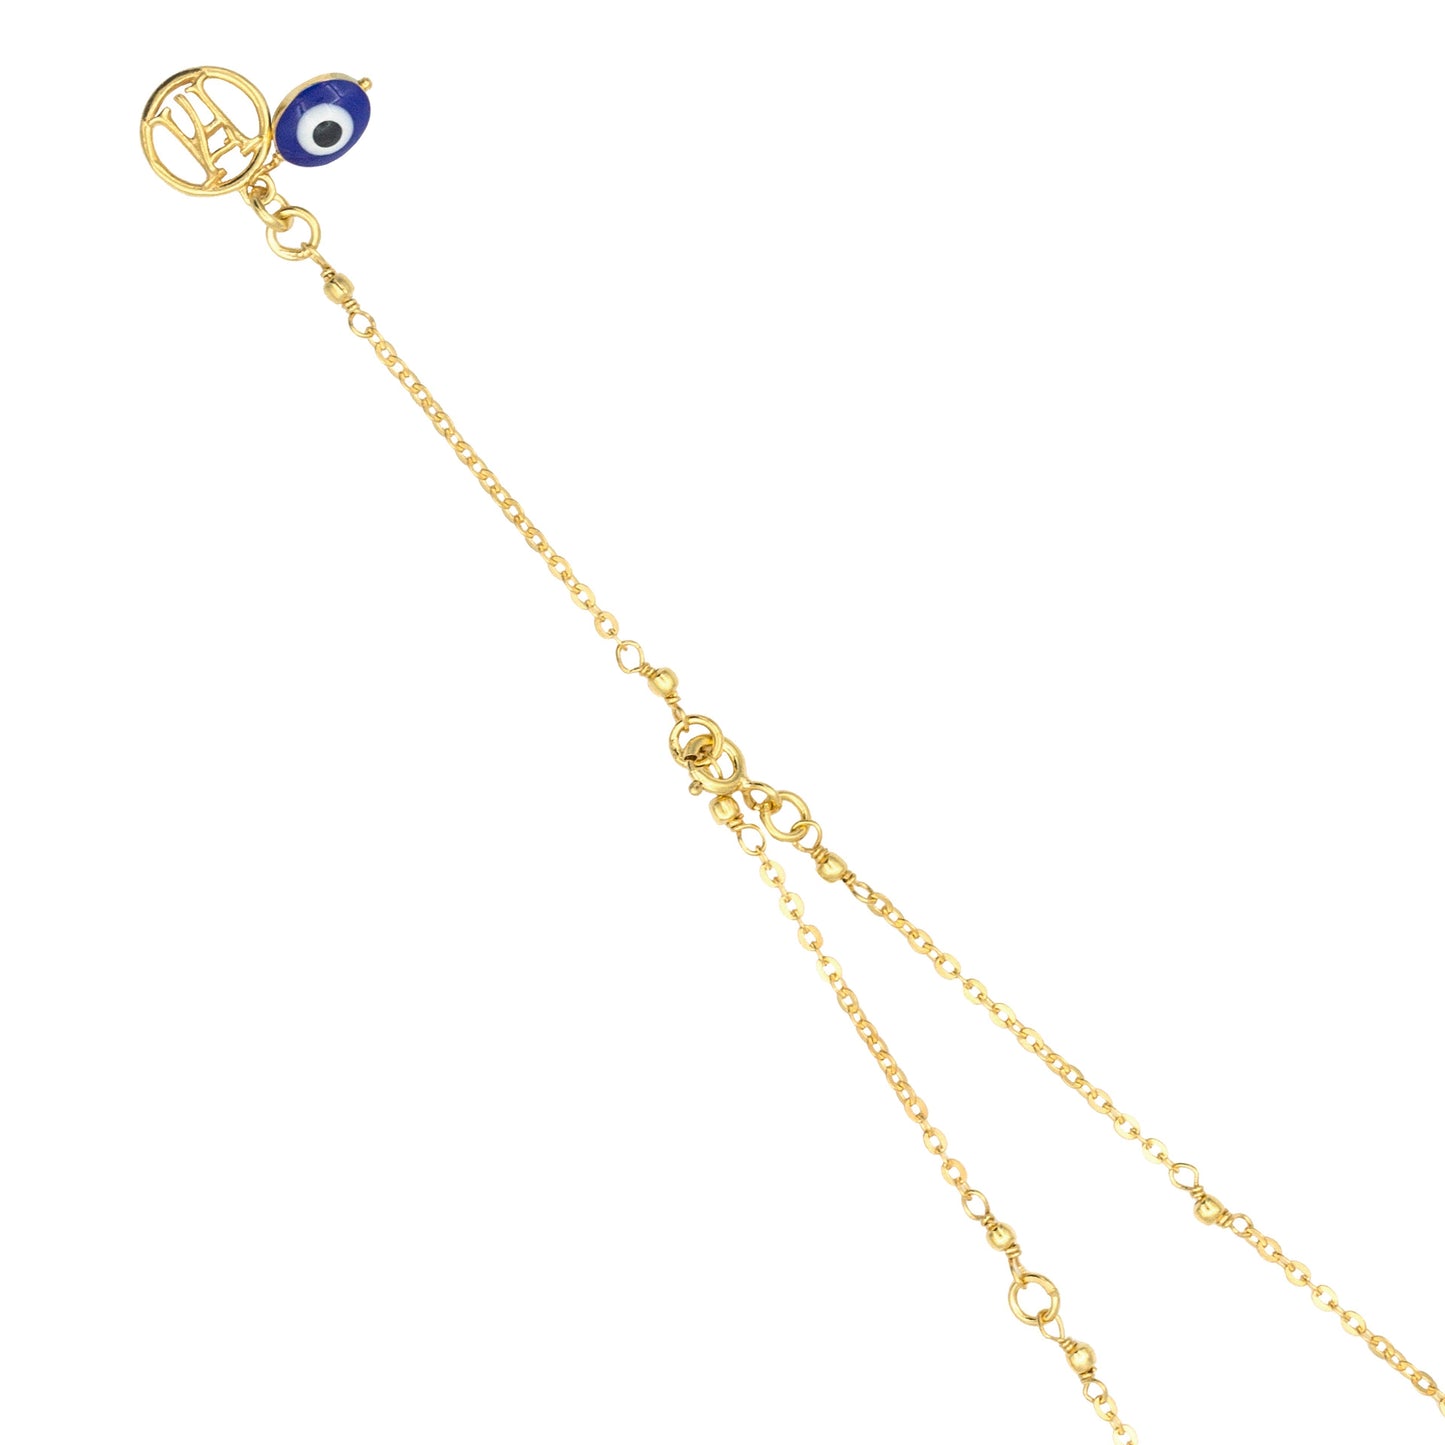 Moon Charm Vermeil Necklace for Enlightenment